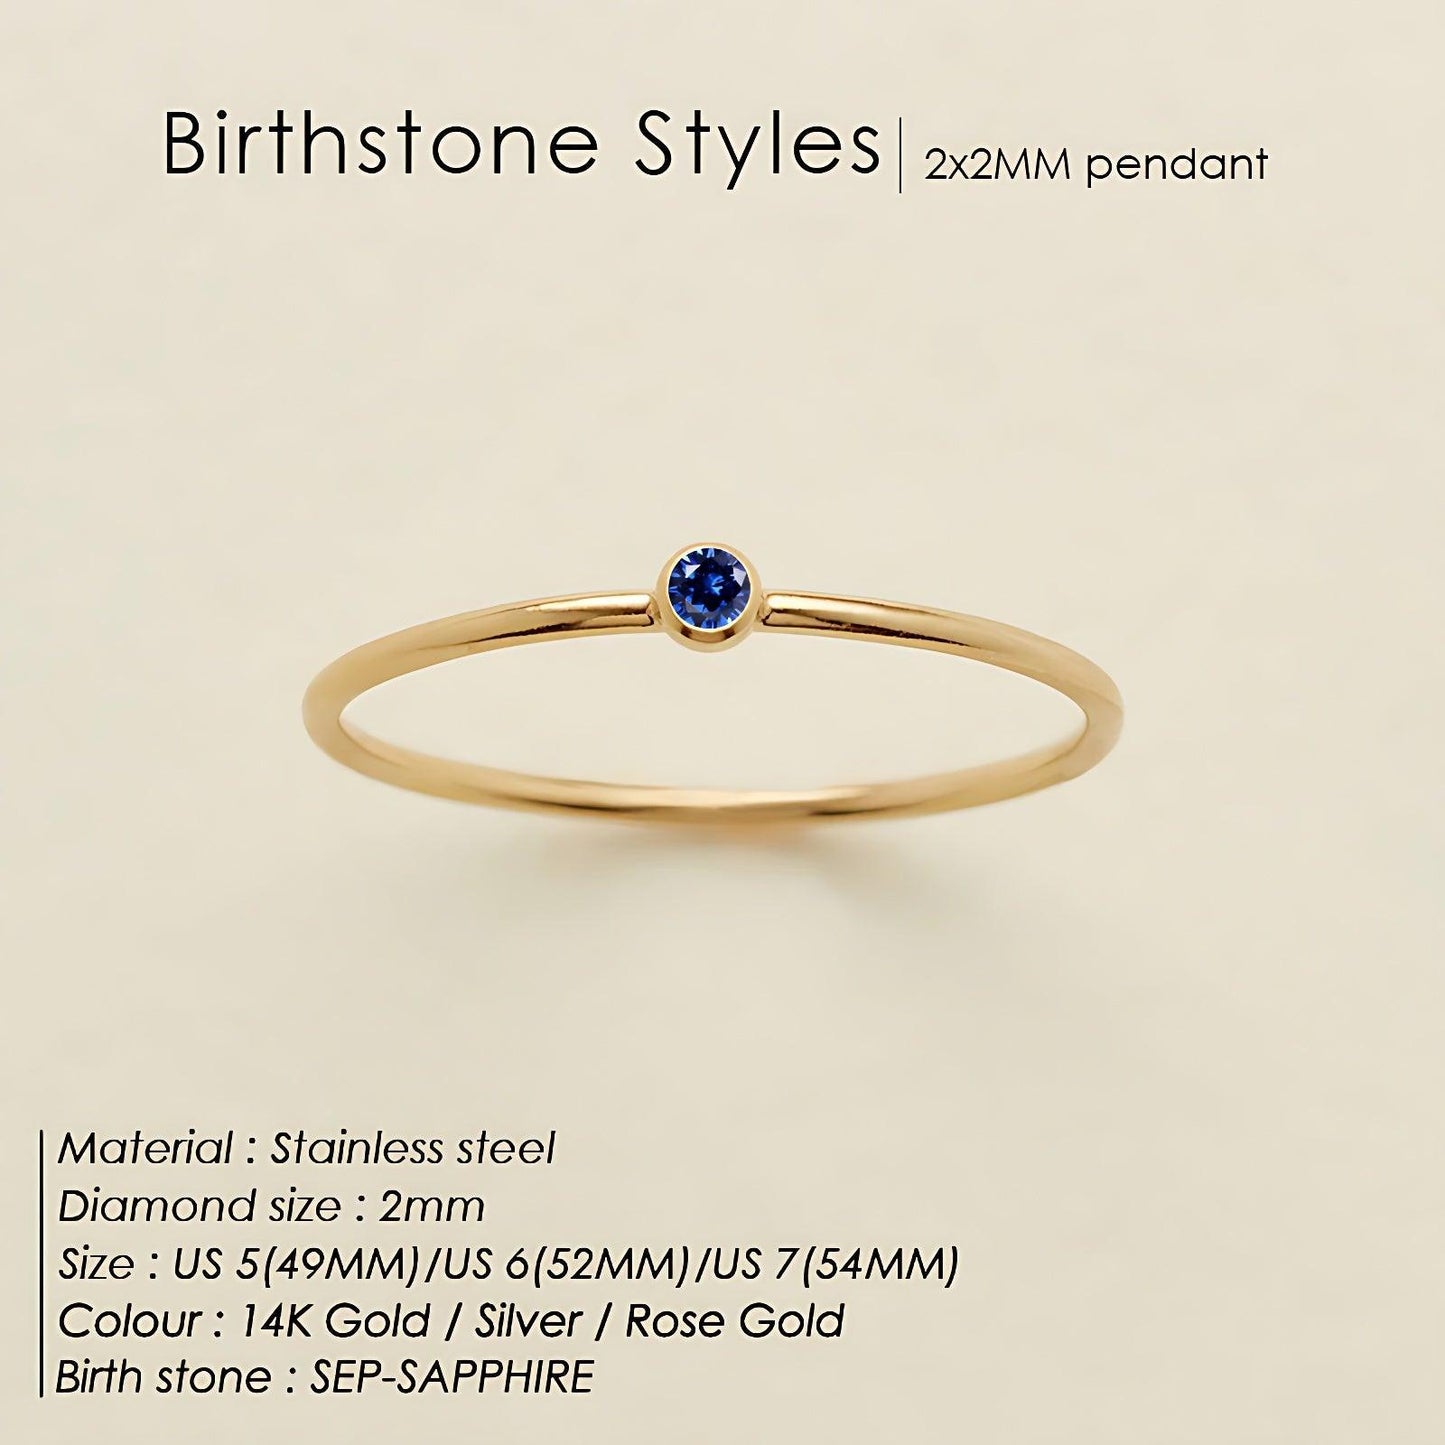 September Birthstone Cute Ring for Christmas 2023 | September Birthstone Cute Ring - undefined | Birthstone Ring, cute ring, S925 Silver Vintage Cute Ring, september birthstone color, September birthstone is Sapphire, Sterling Silver s925 cute Ring | From Hunny Life | hunnylife.com